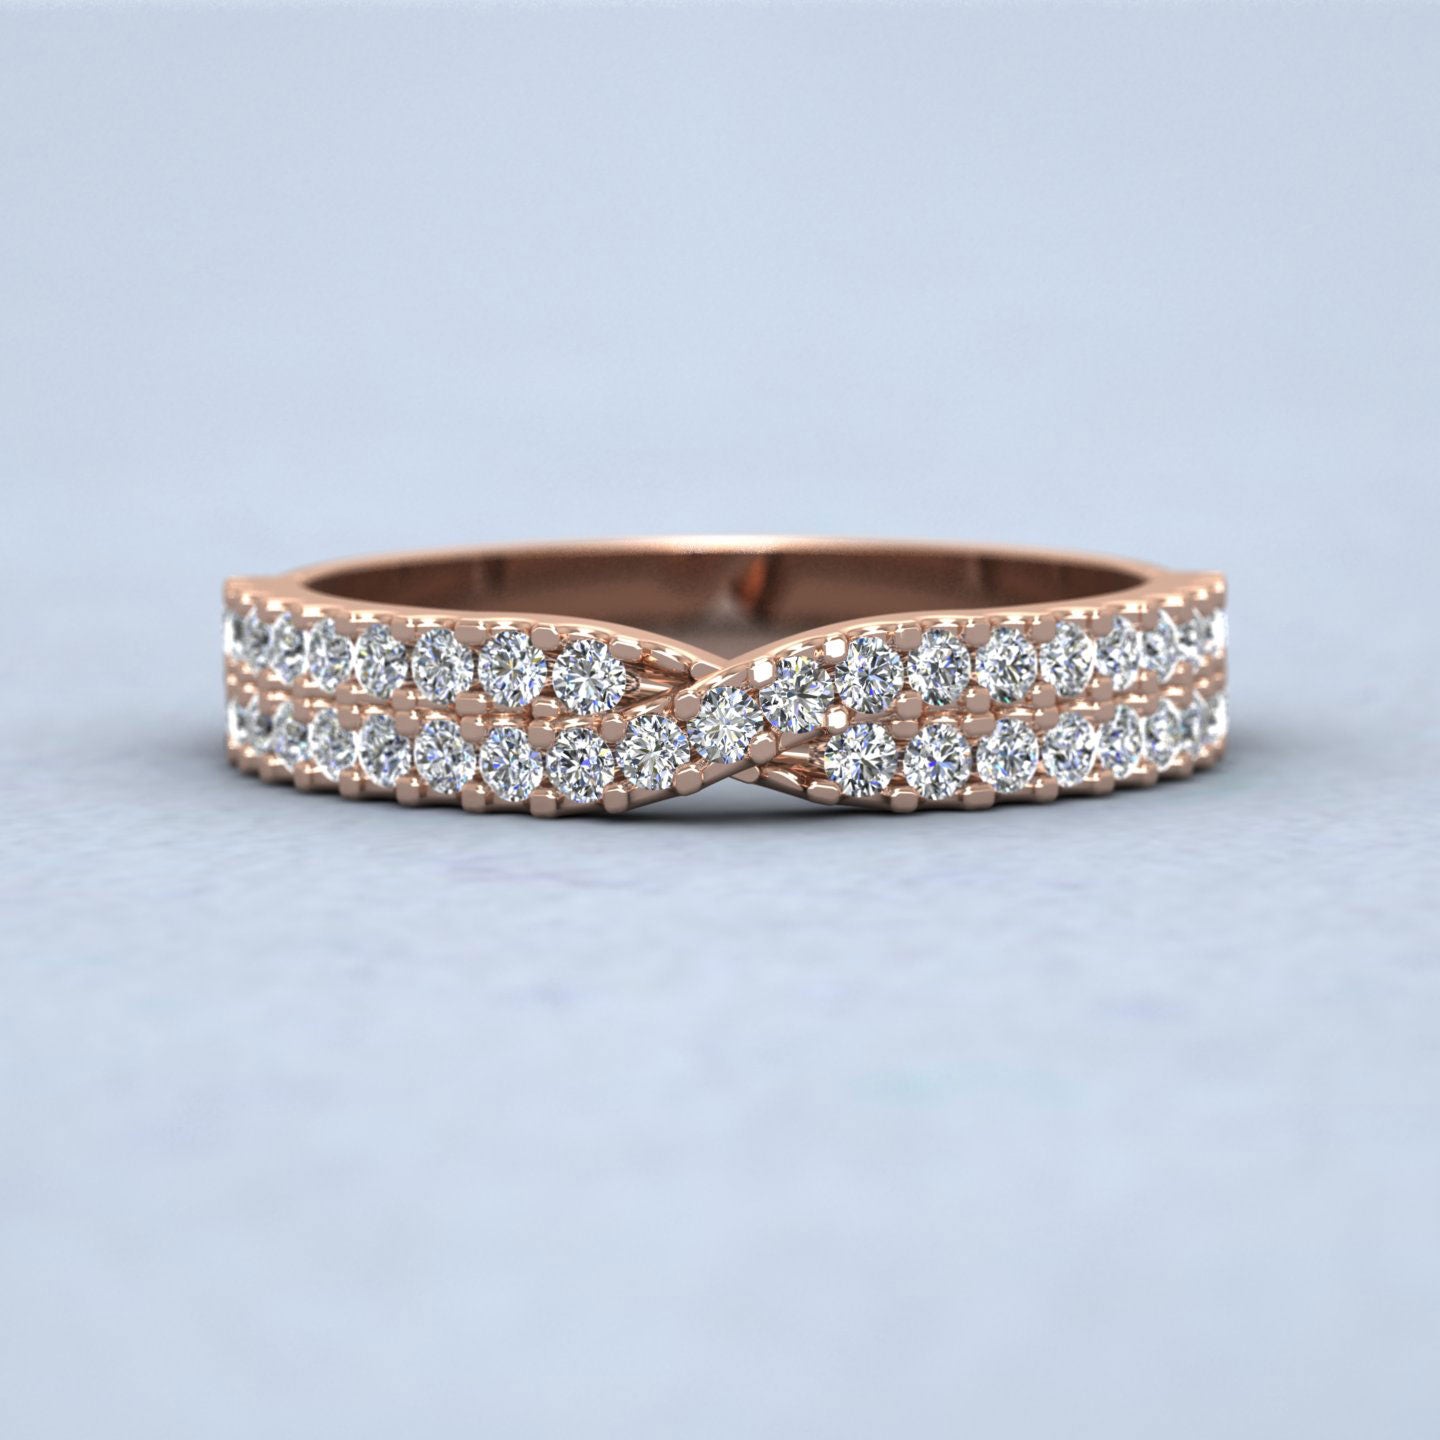 Crossover Diamond Claw Set Wedding Ring In 9ct Rose Gold 3.5mm Wide